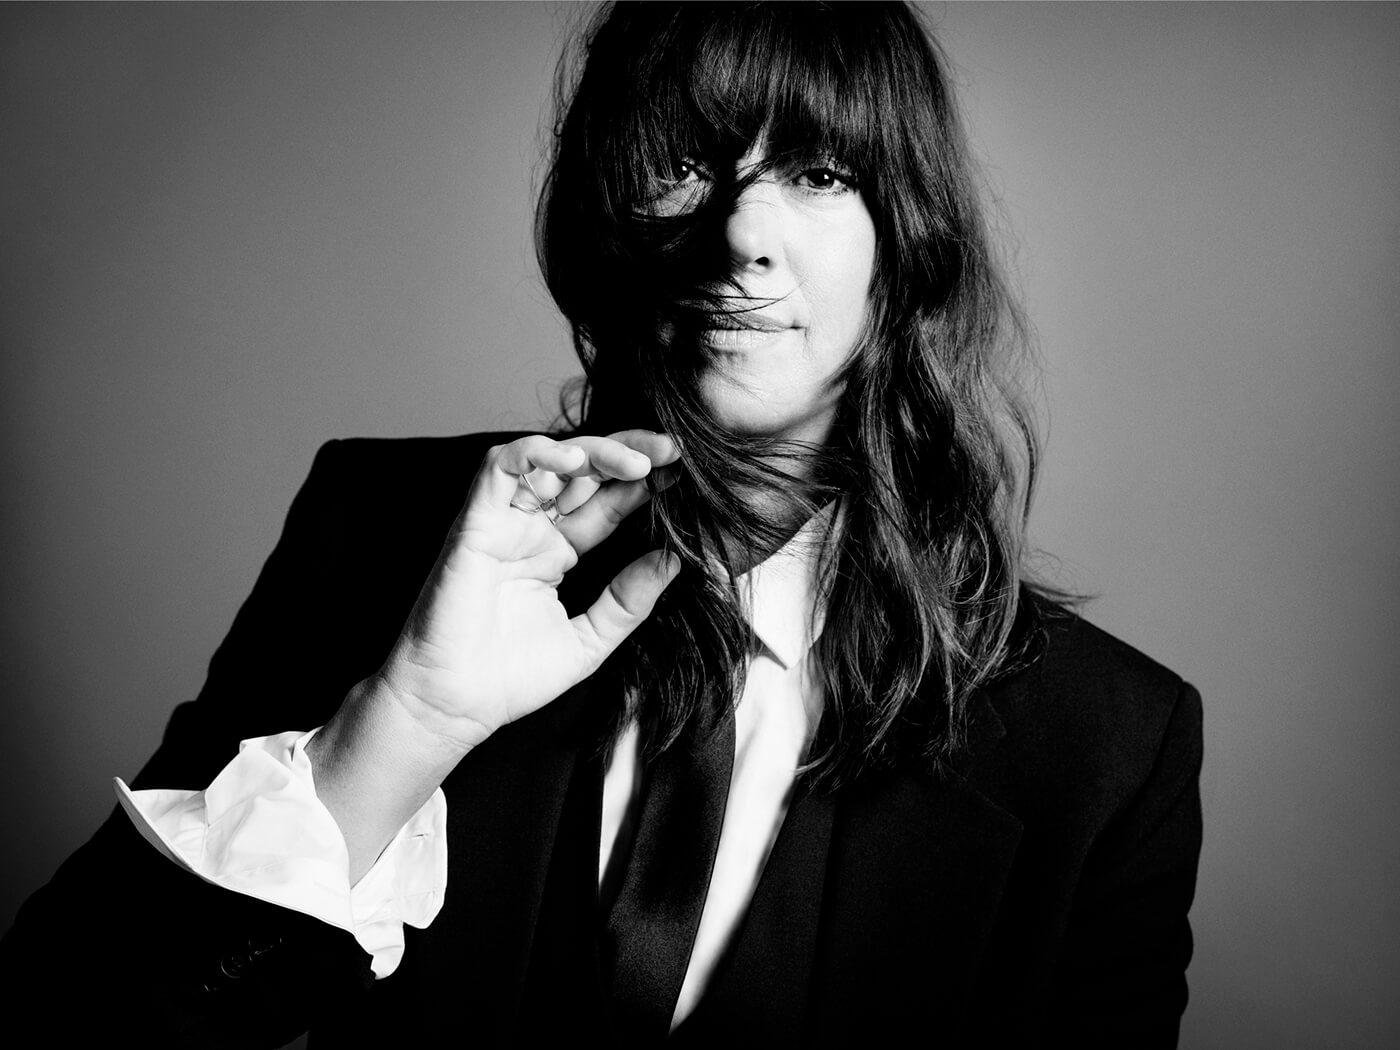 Send us your questions for Cat Power